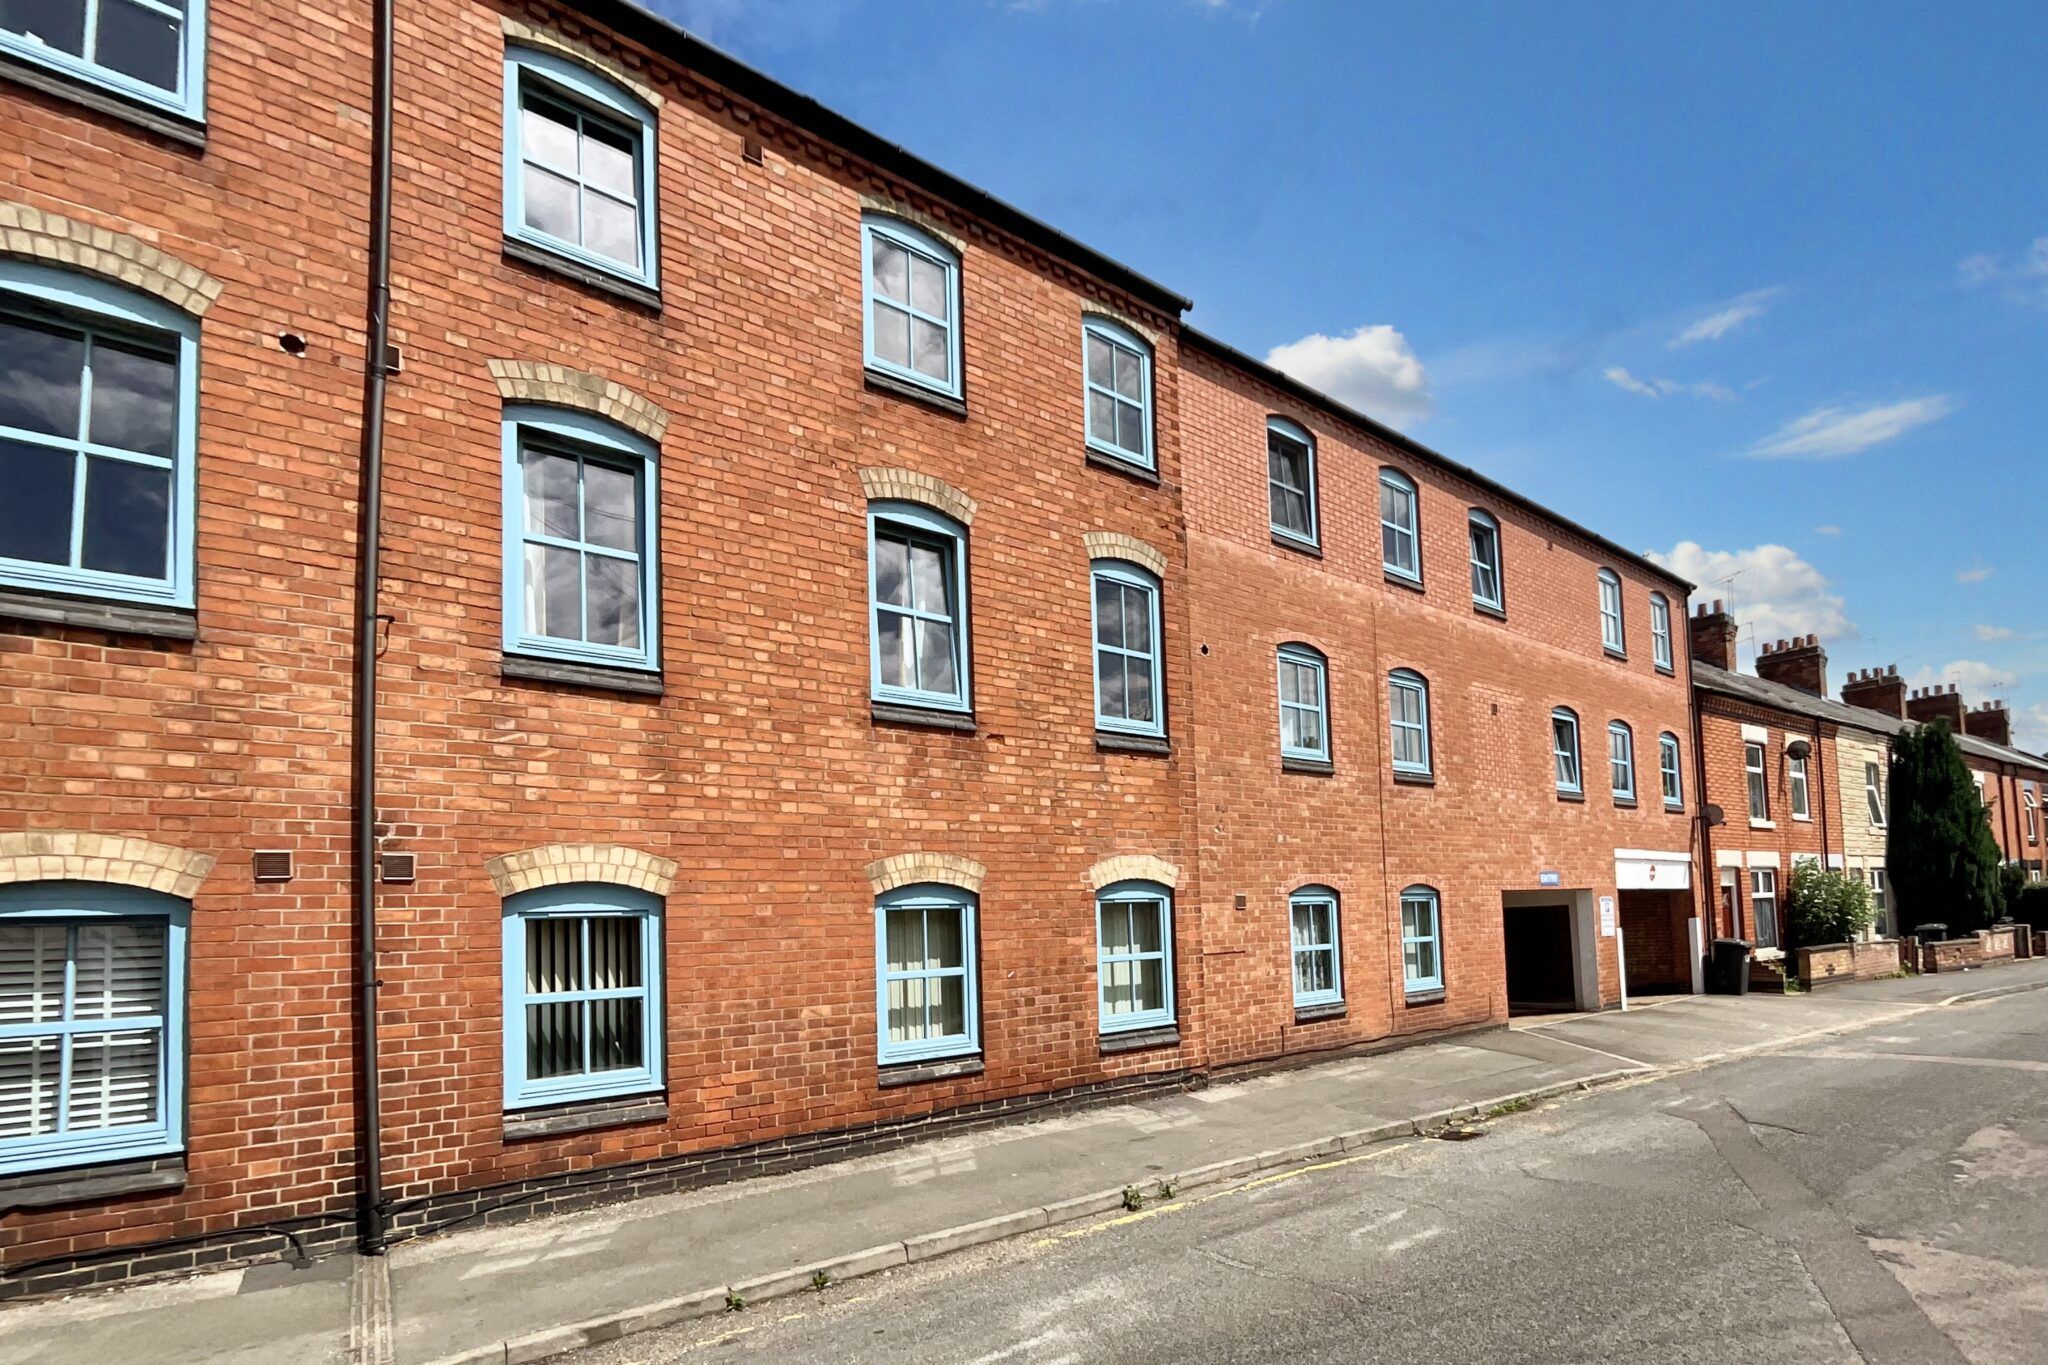 Flat 12, Hadden-Costello House, Leicester, 122 Lansdowne Road, LE2 8AR